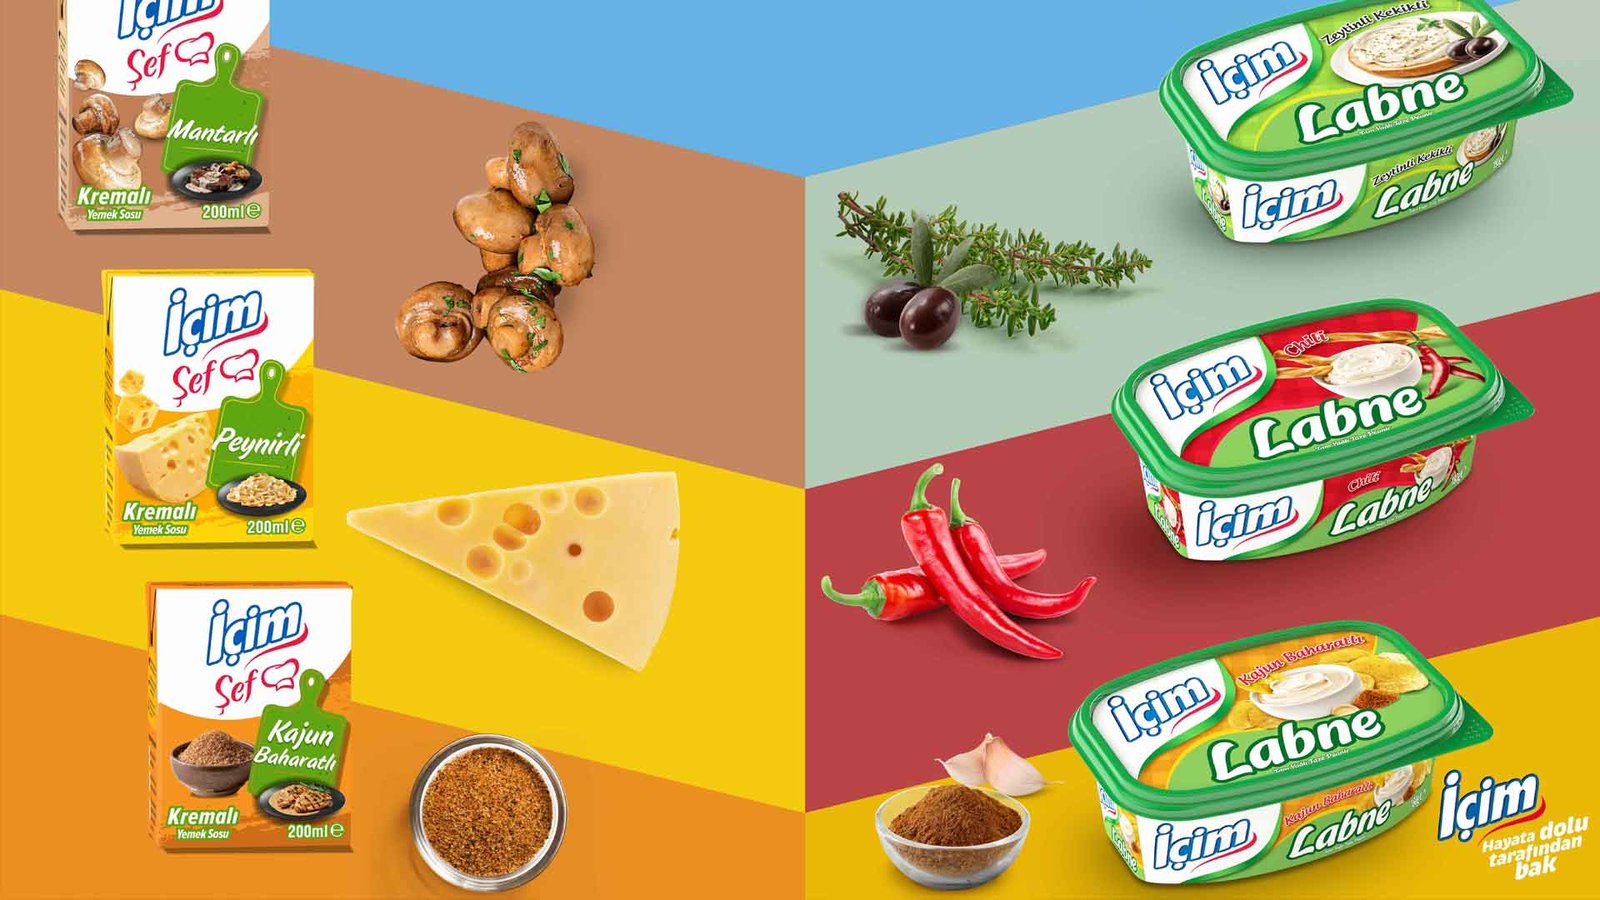 İçim Labne And Chef Cream Innovation On Your Tables With Spicy And Flavorful Alternatives!